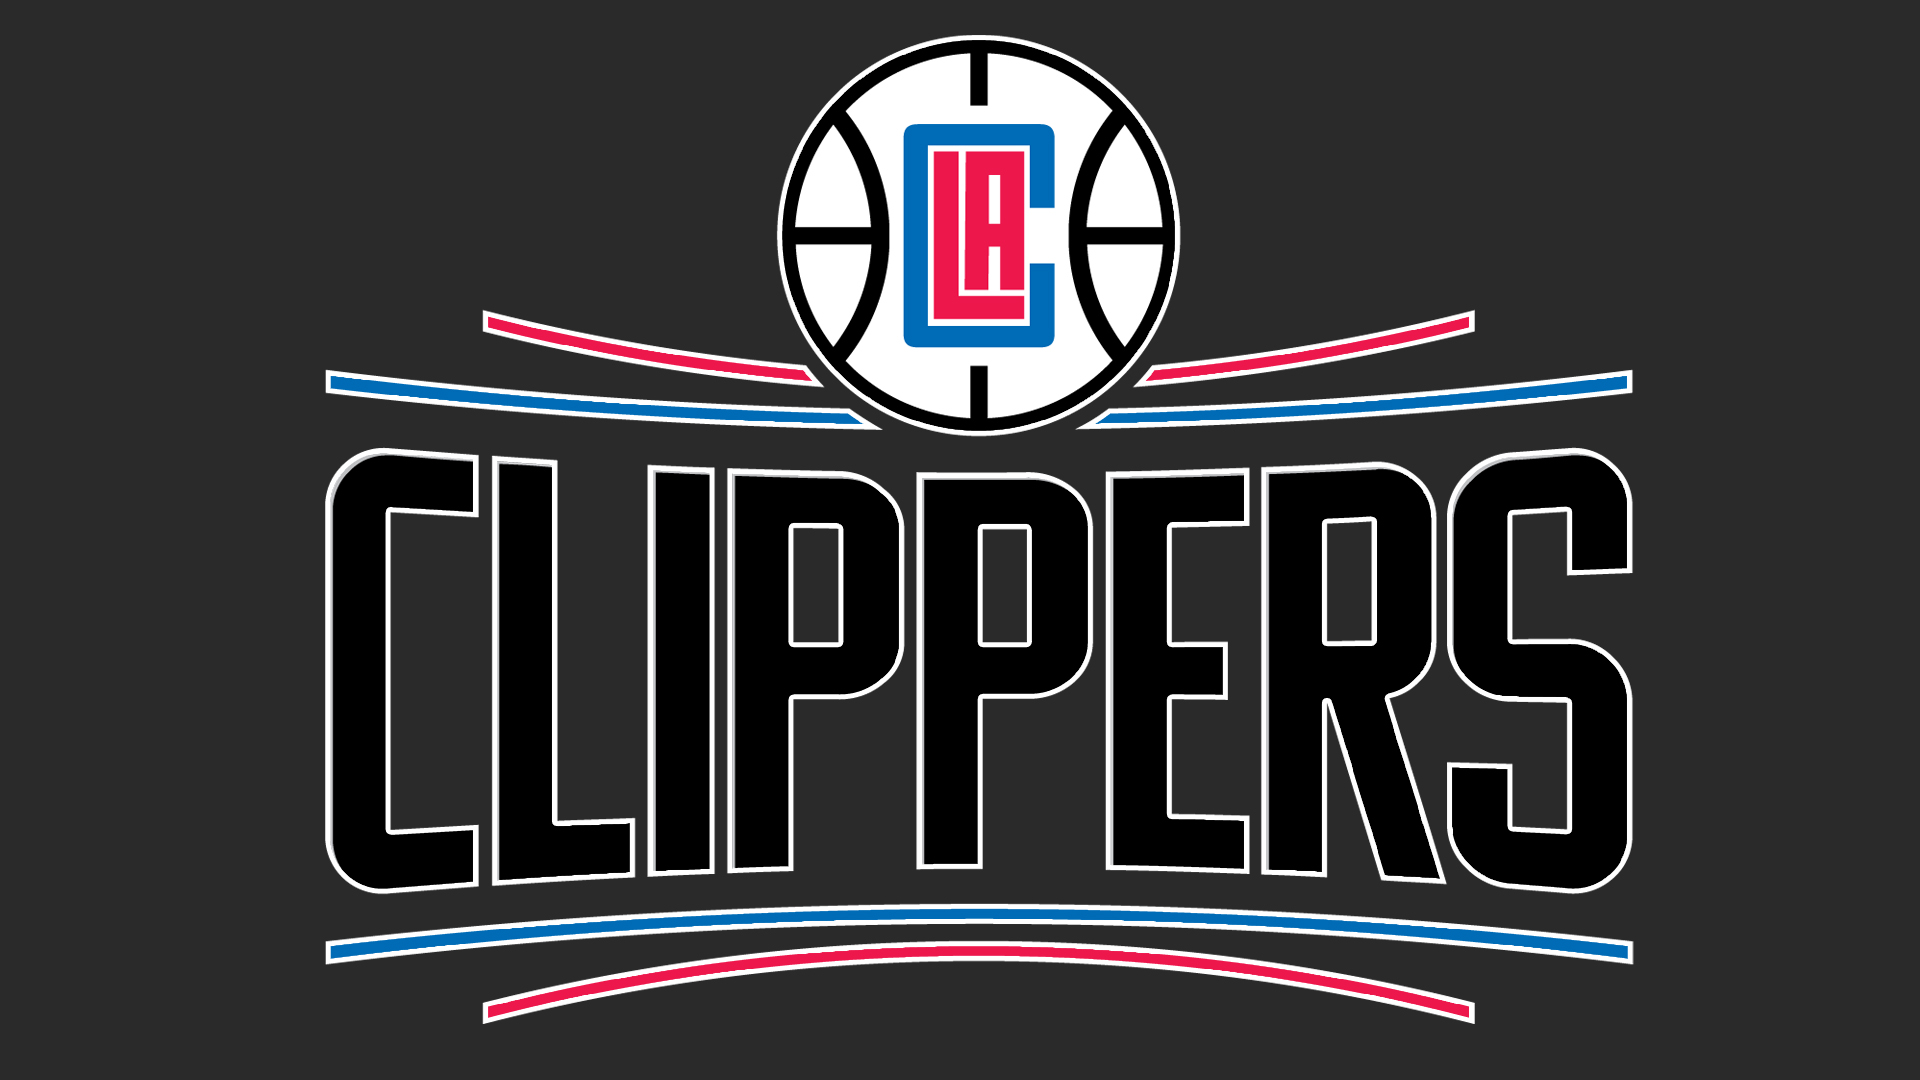 sports, los angeles clippers, basketball, logo, nba